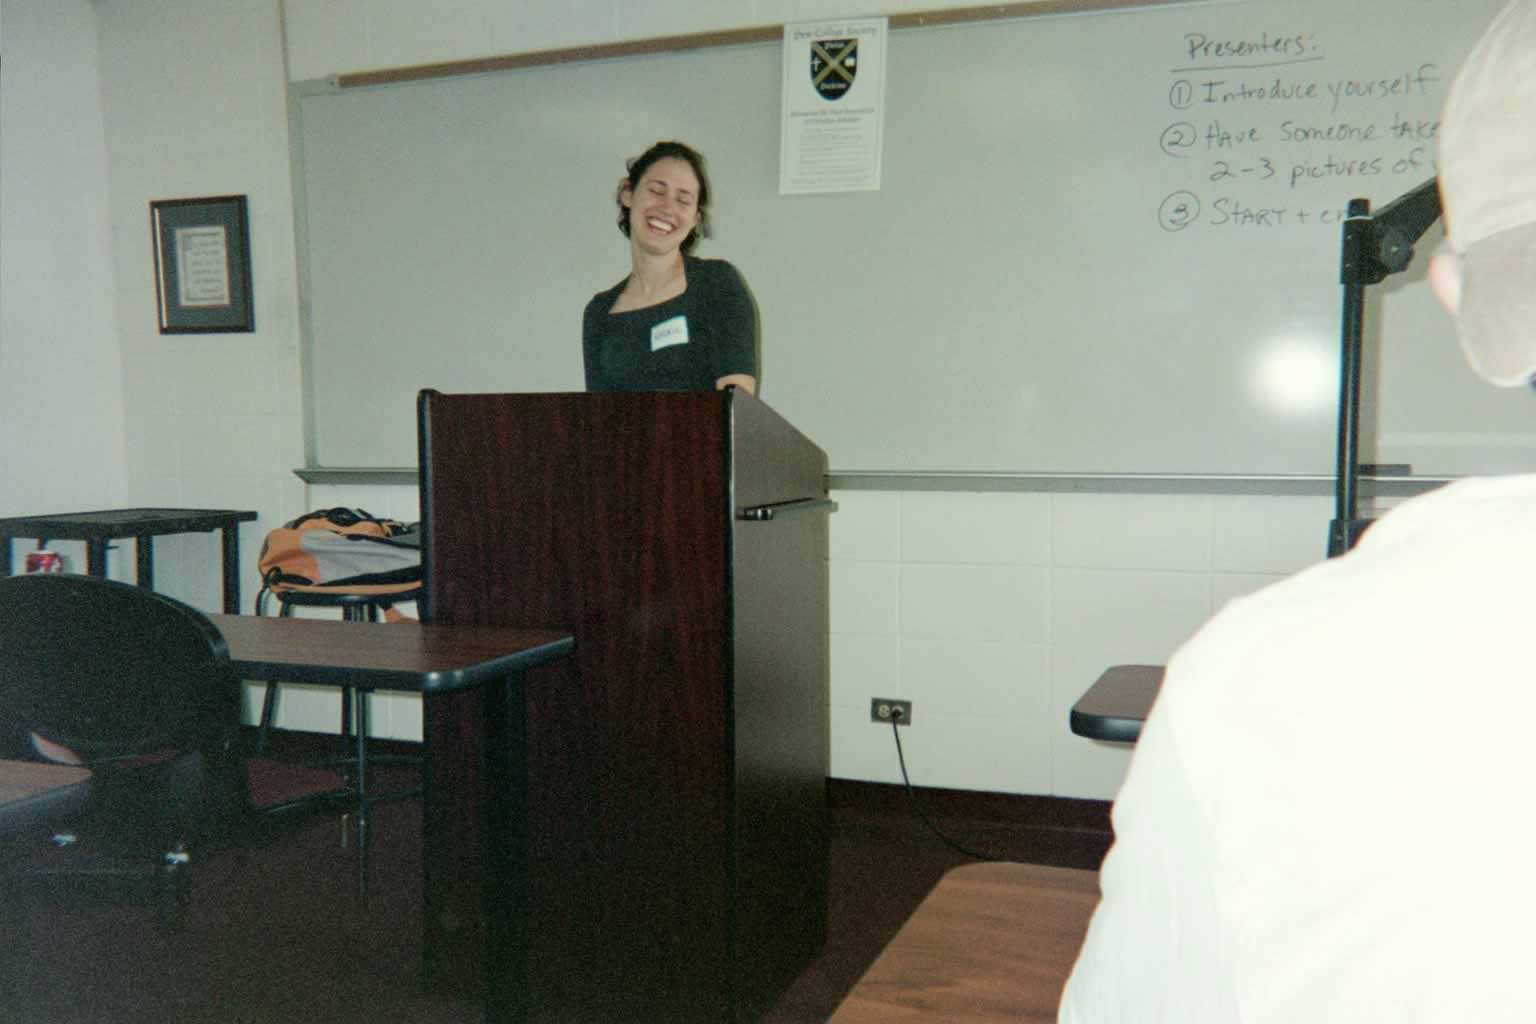 picture of a woman smiling behind a podium